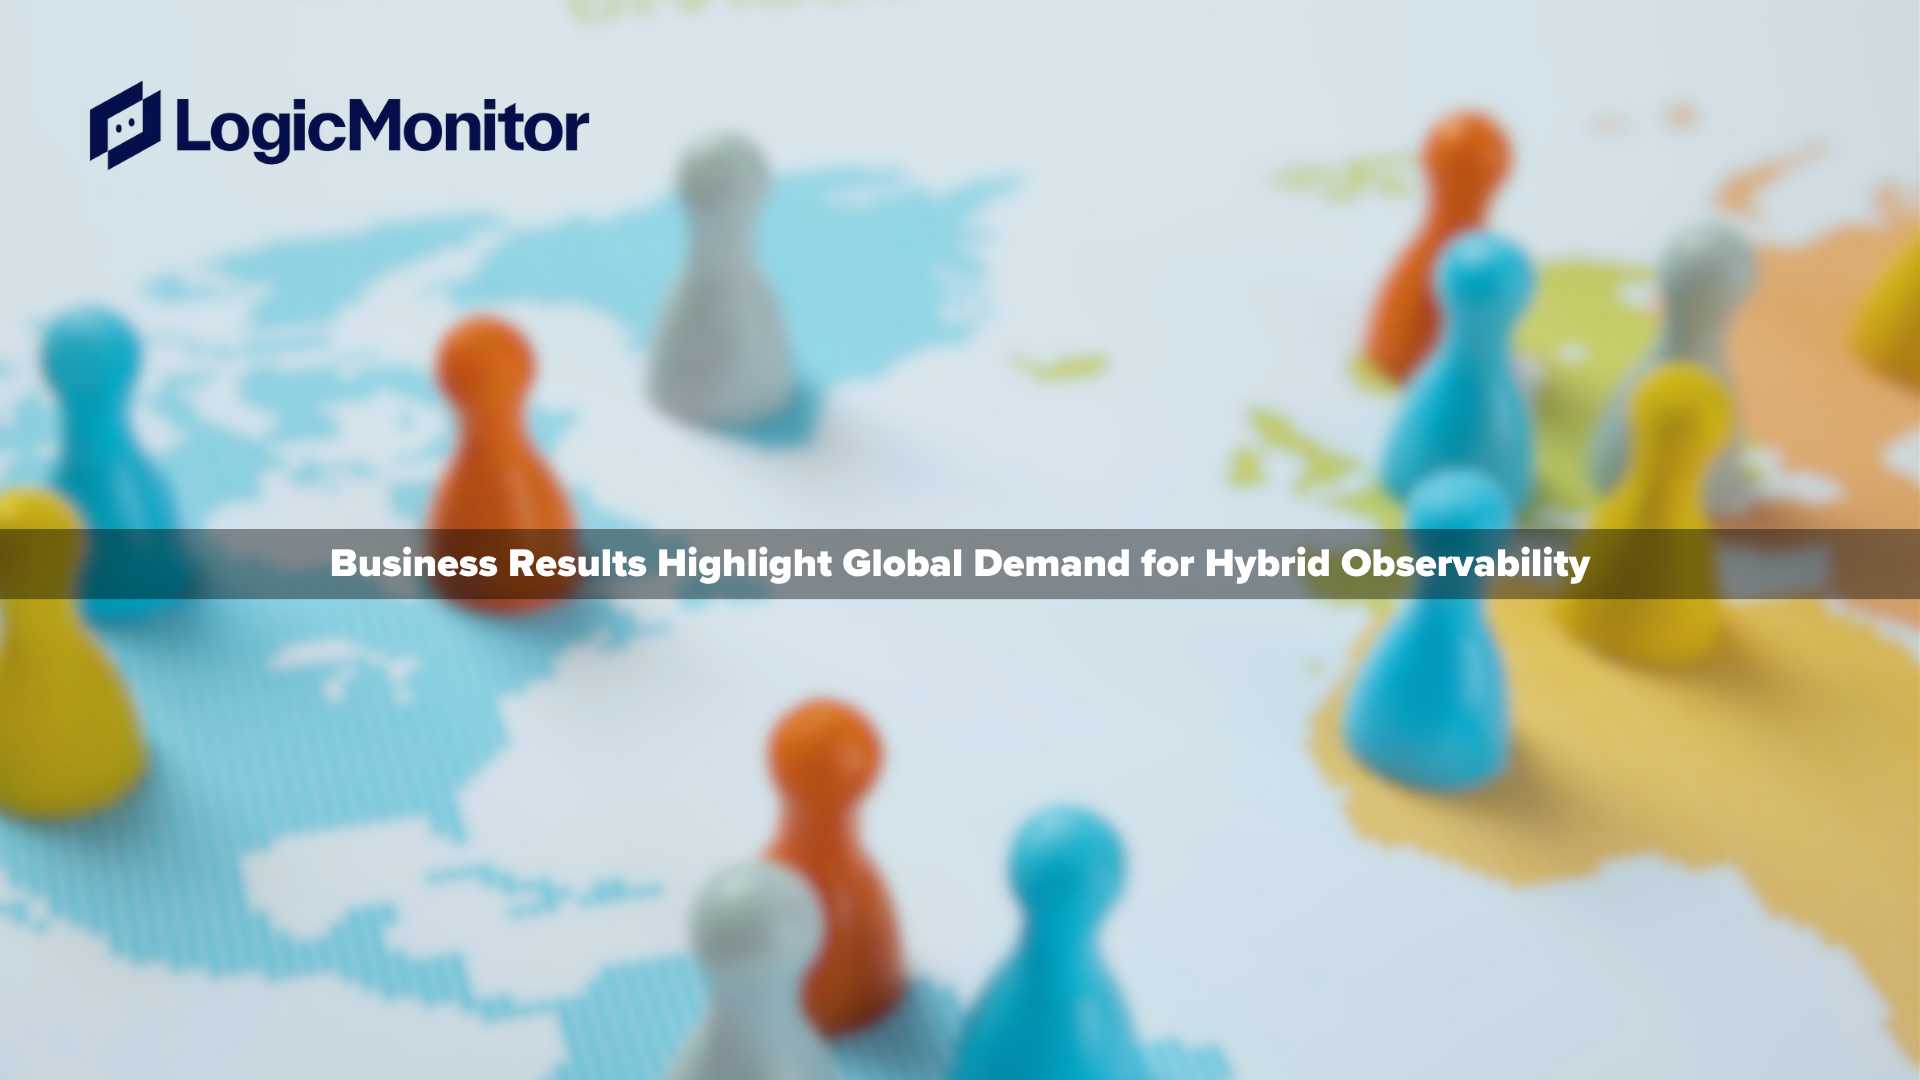 LogicMonitor's Business Results Highlight Global Demand for Hybrid Observability